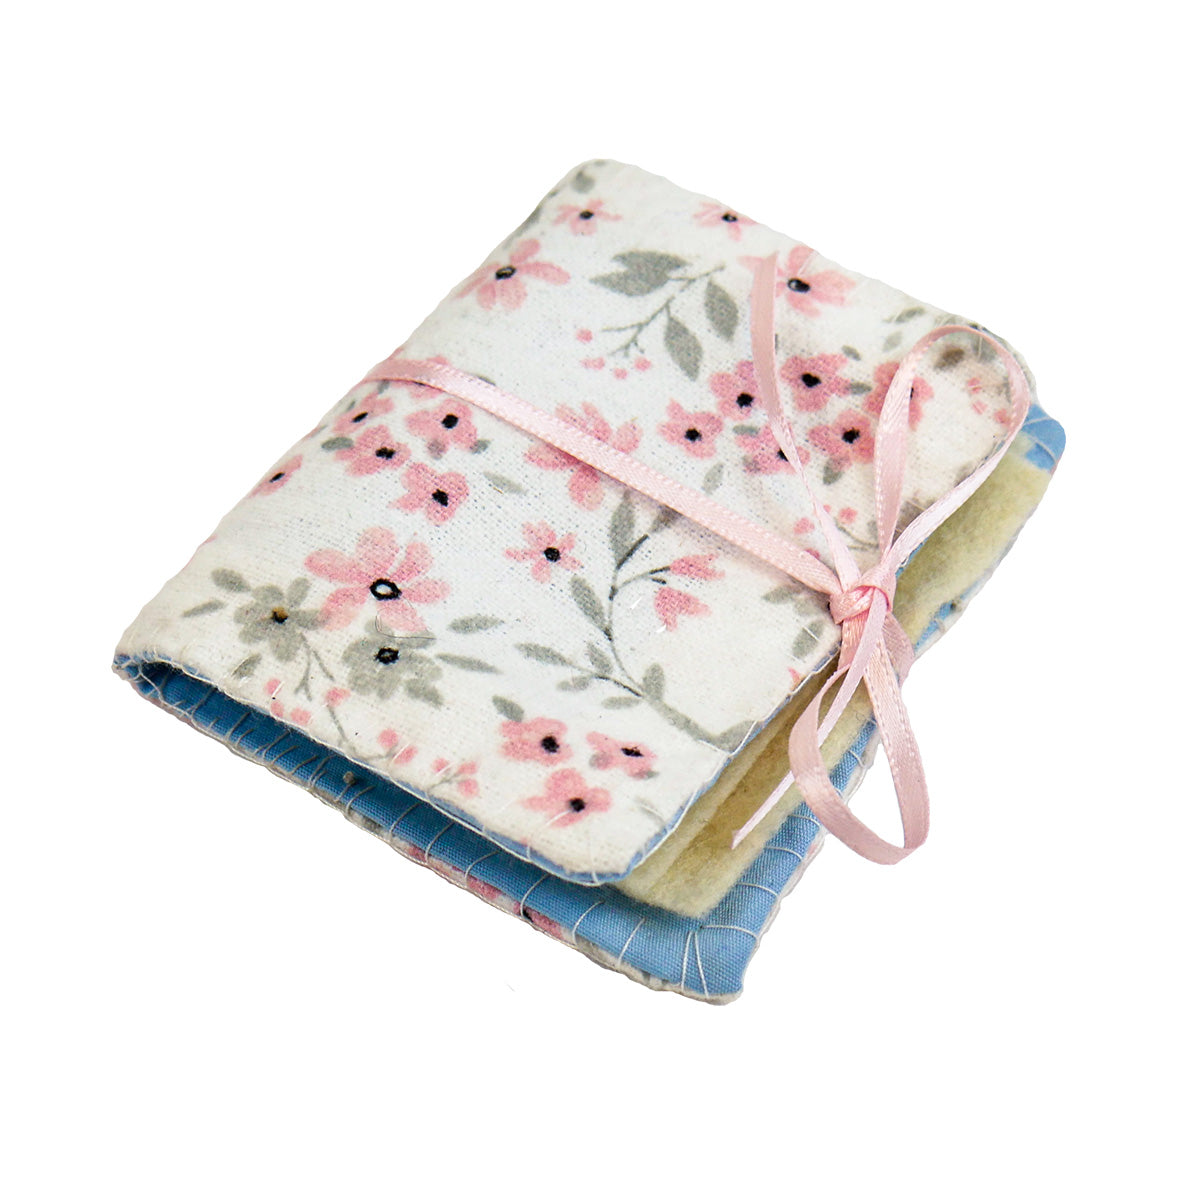 A single completed Needle Book with a pink floral patterned fabric on the outside, yellow felt pages on the inside, and a thin pink ribbon tying it closed around with a bow.